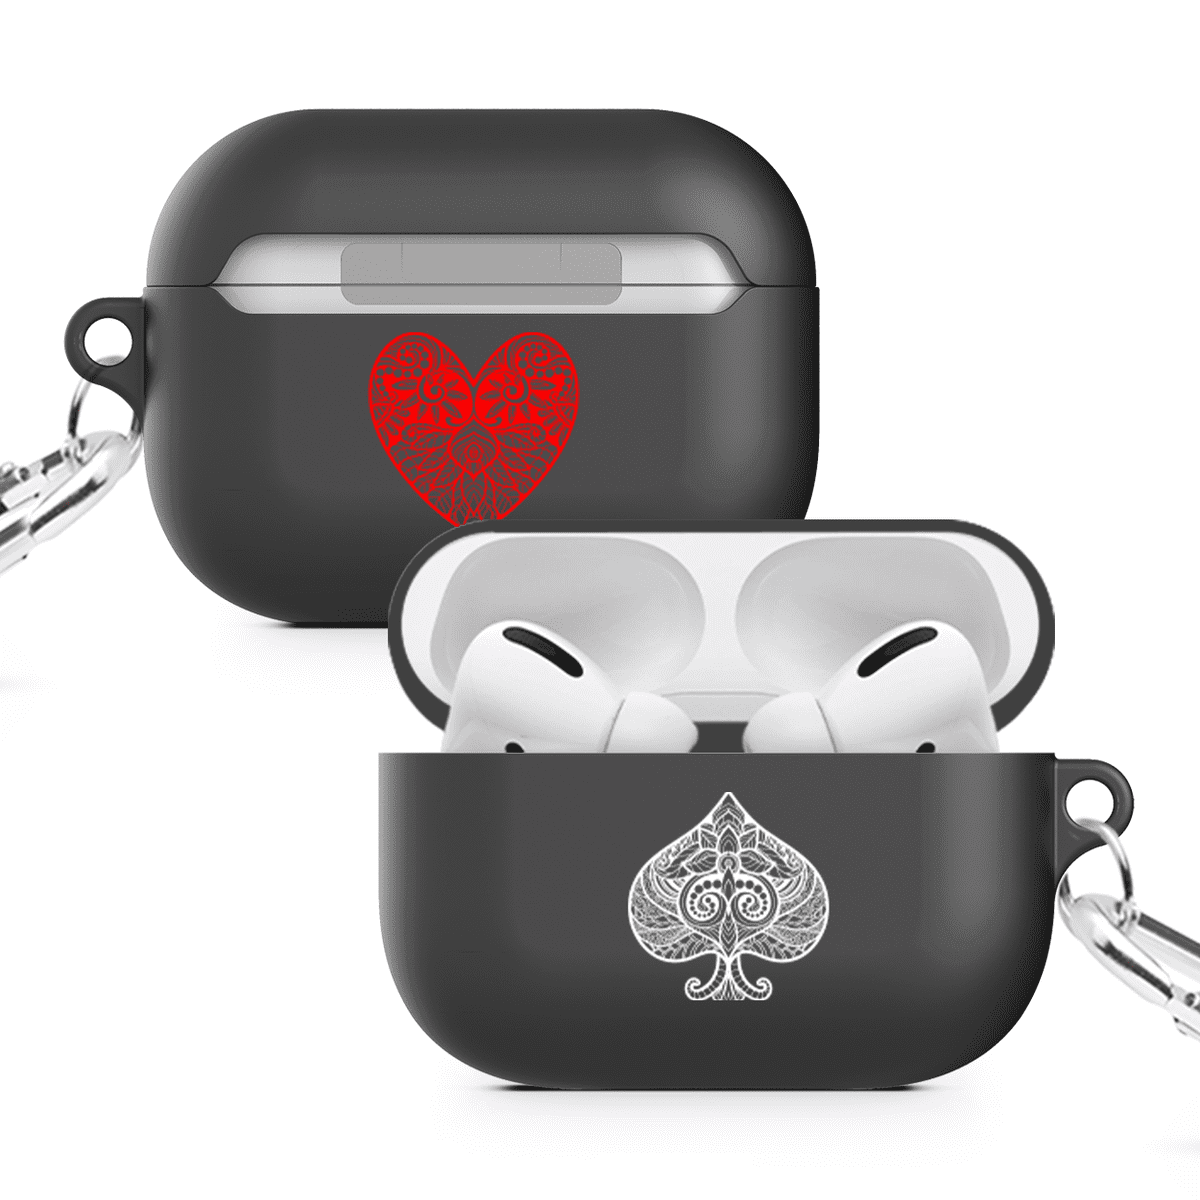 Personalized AirPods Cases: Combining Functionality with Fashion